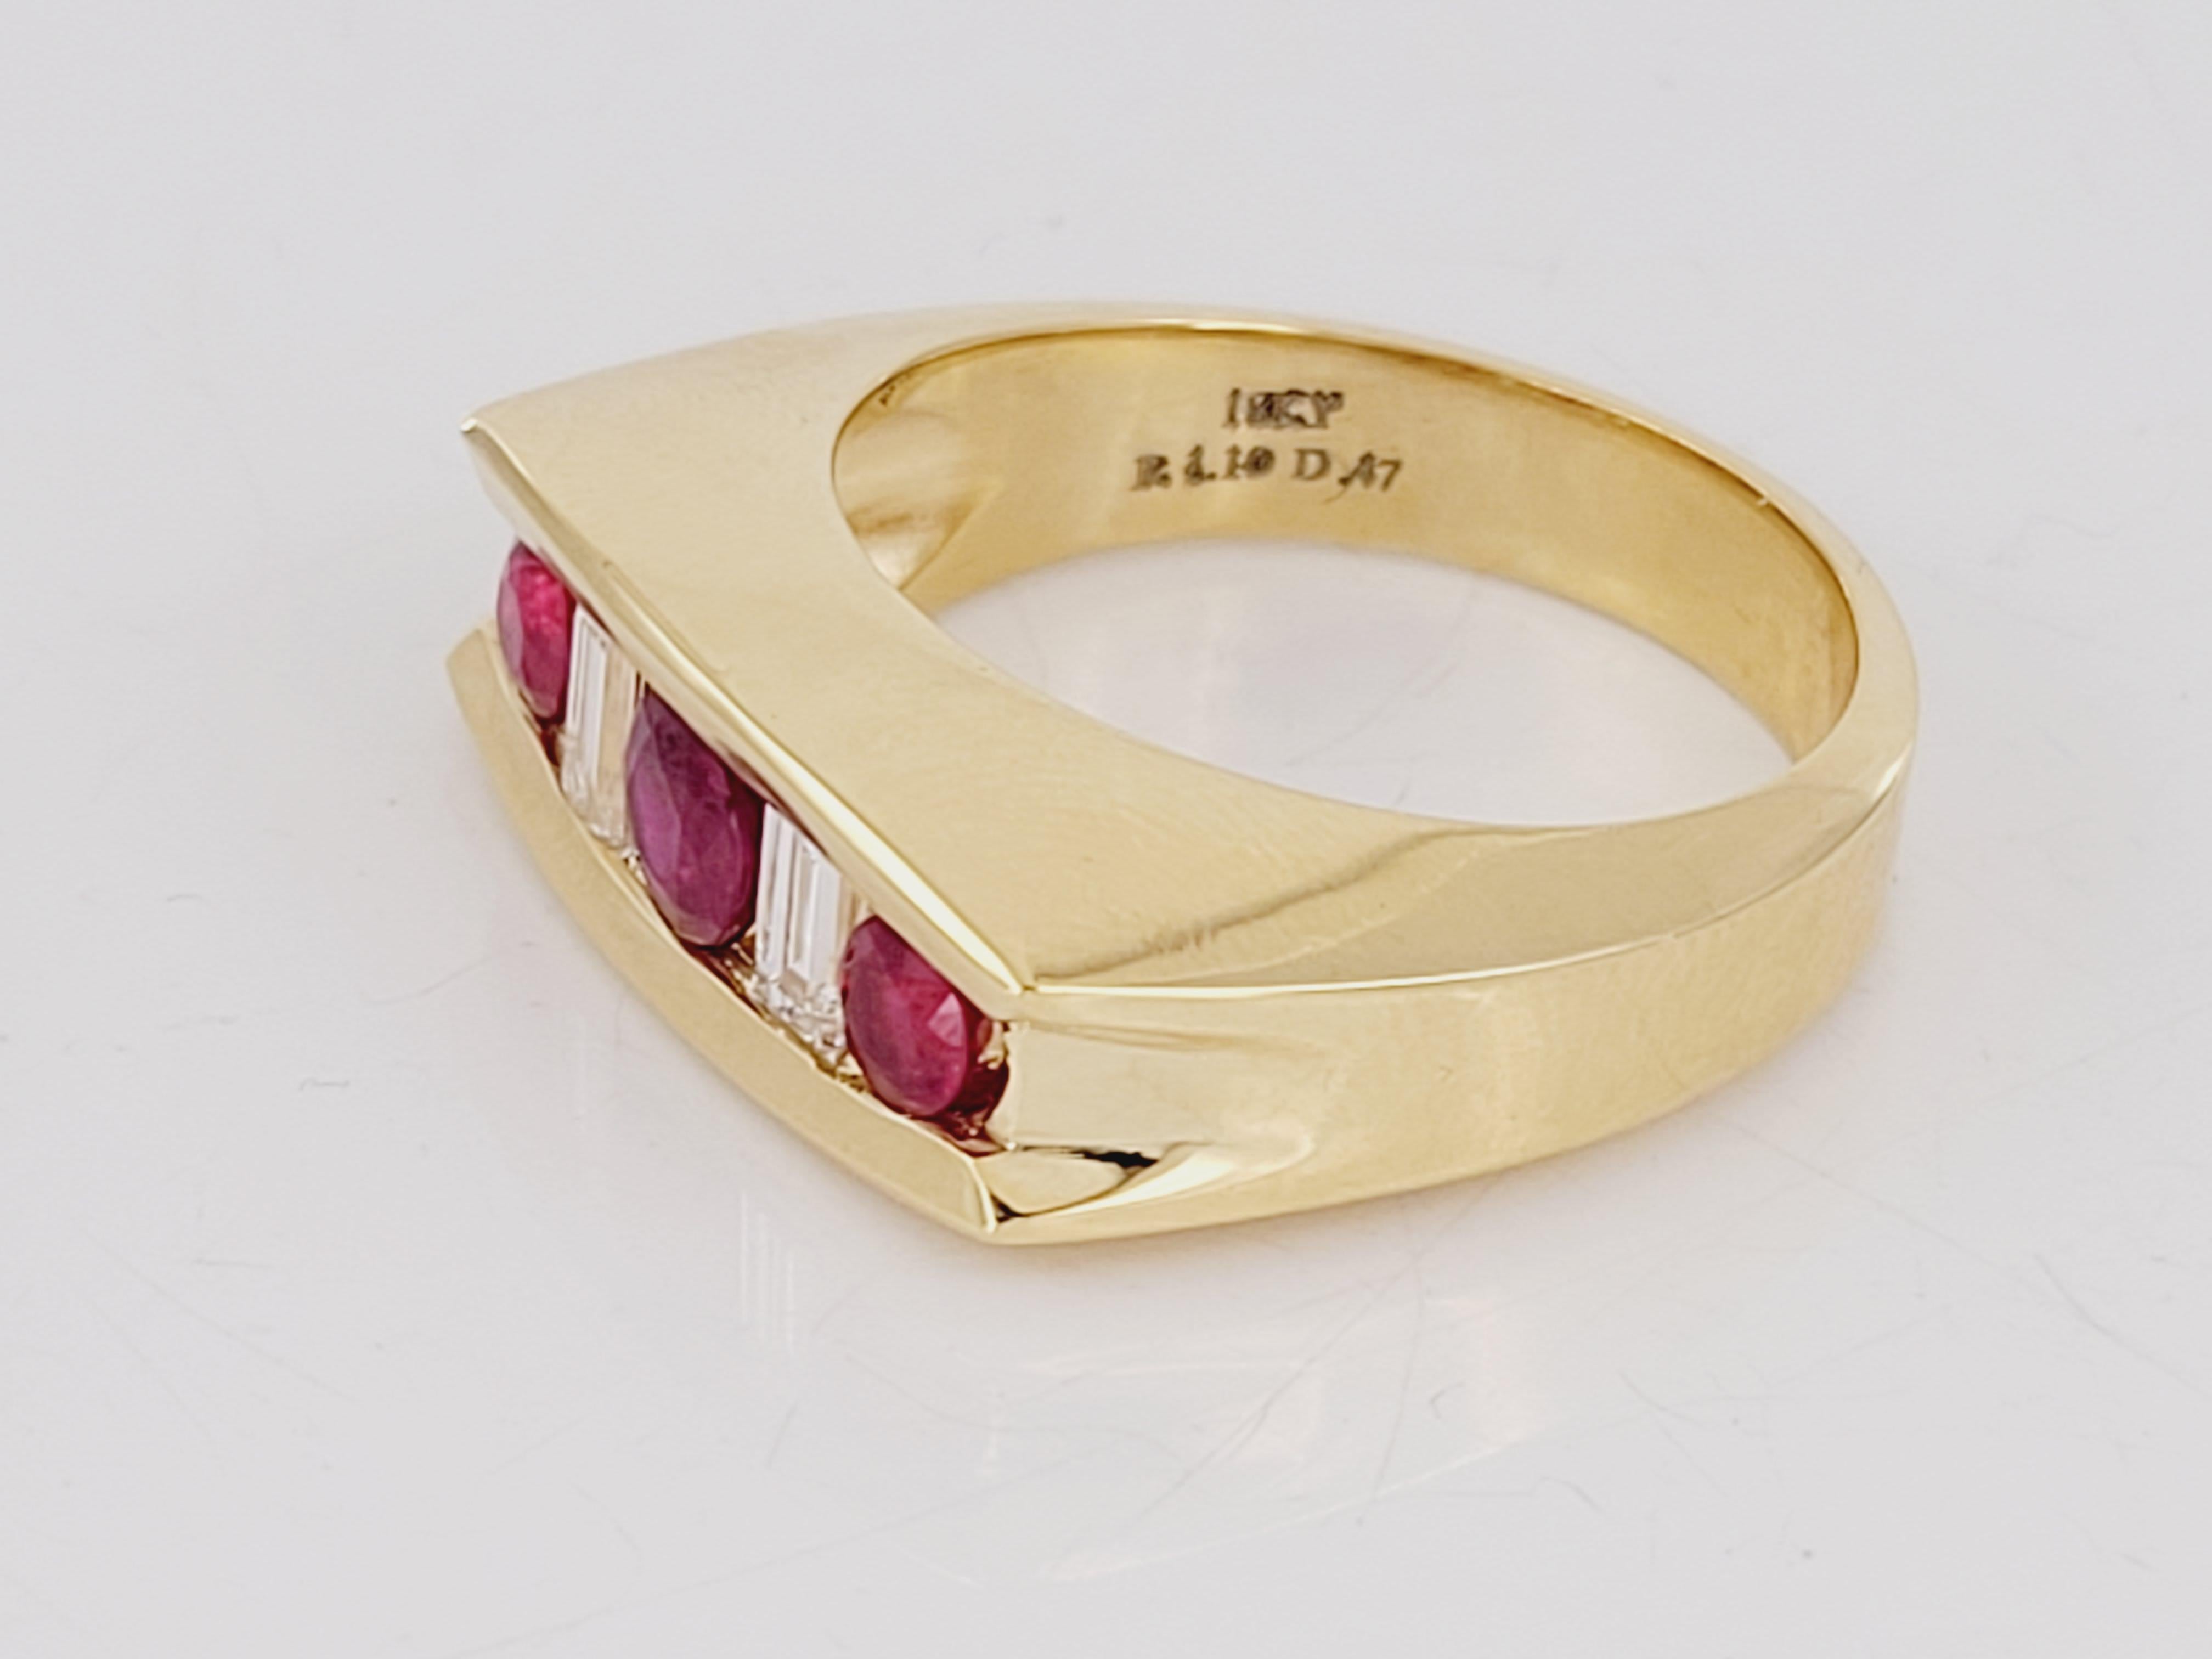 Burmese rubies are the rarest gemstone in the world due to their intense red brilliance.
Burmese Ruby and White Diamond Men Band in 18K Yellow Gold. The Diamonds are cut in emerald shape, in a total of 1.5carat weight for the two stones. The red